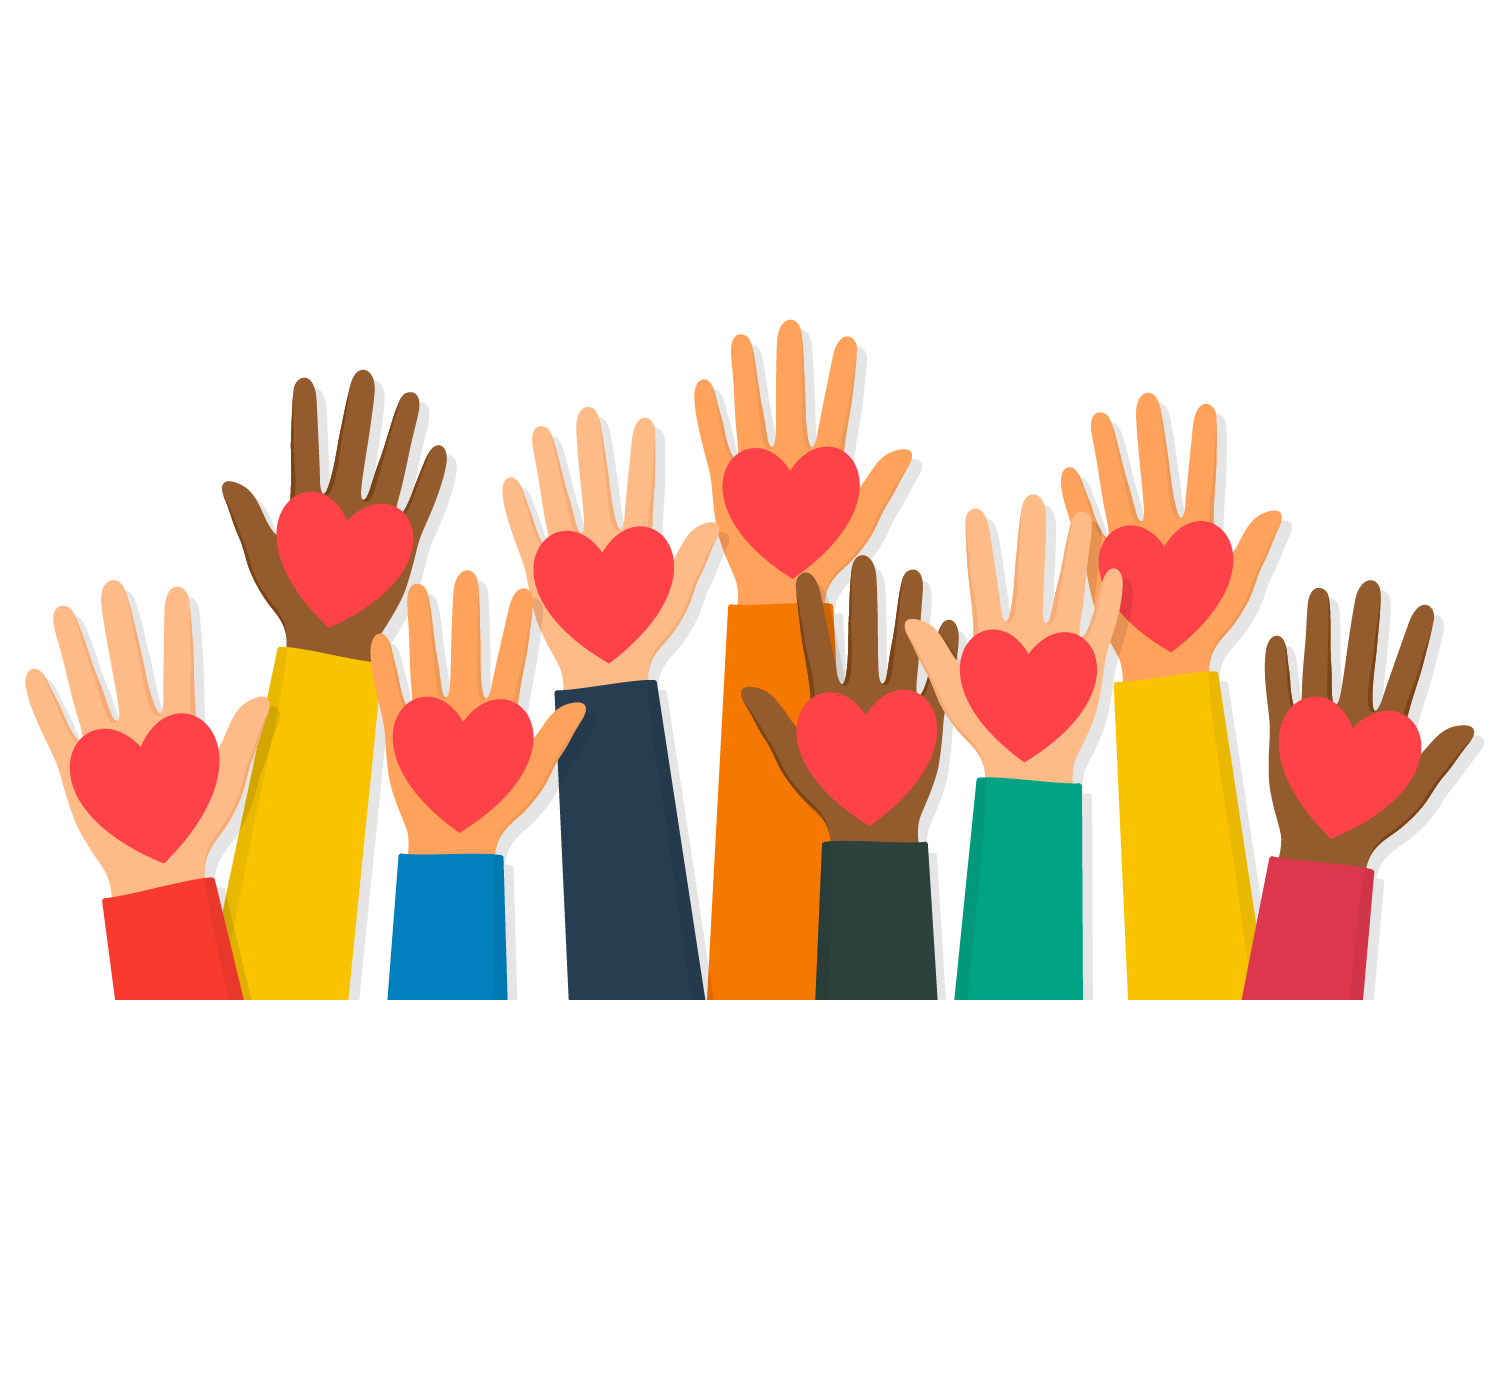 Images shows a cartoon of raised hands with a heart symbol in their palms.